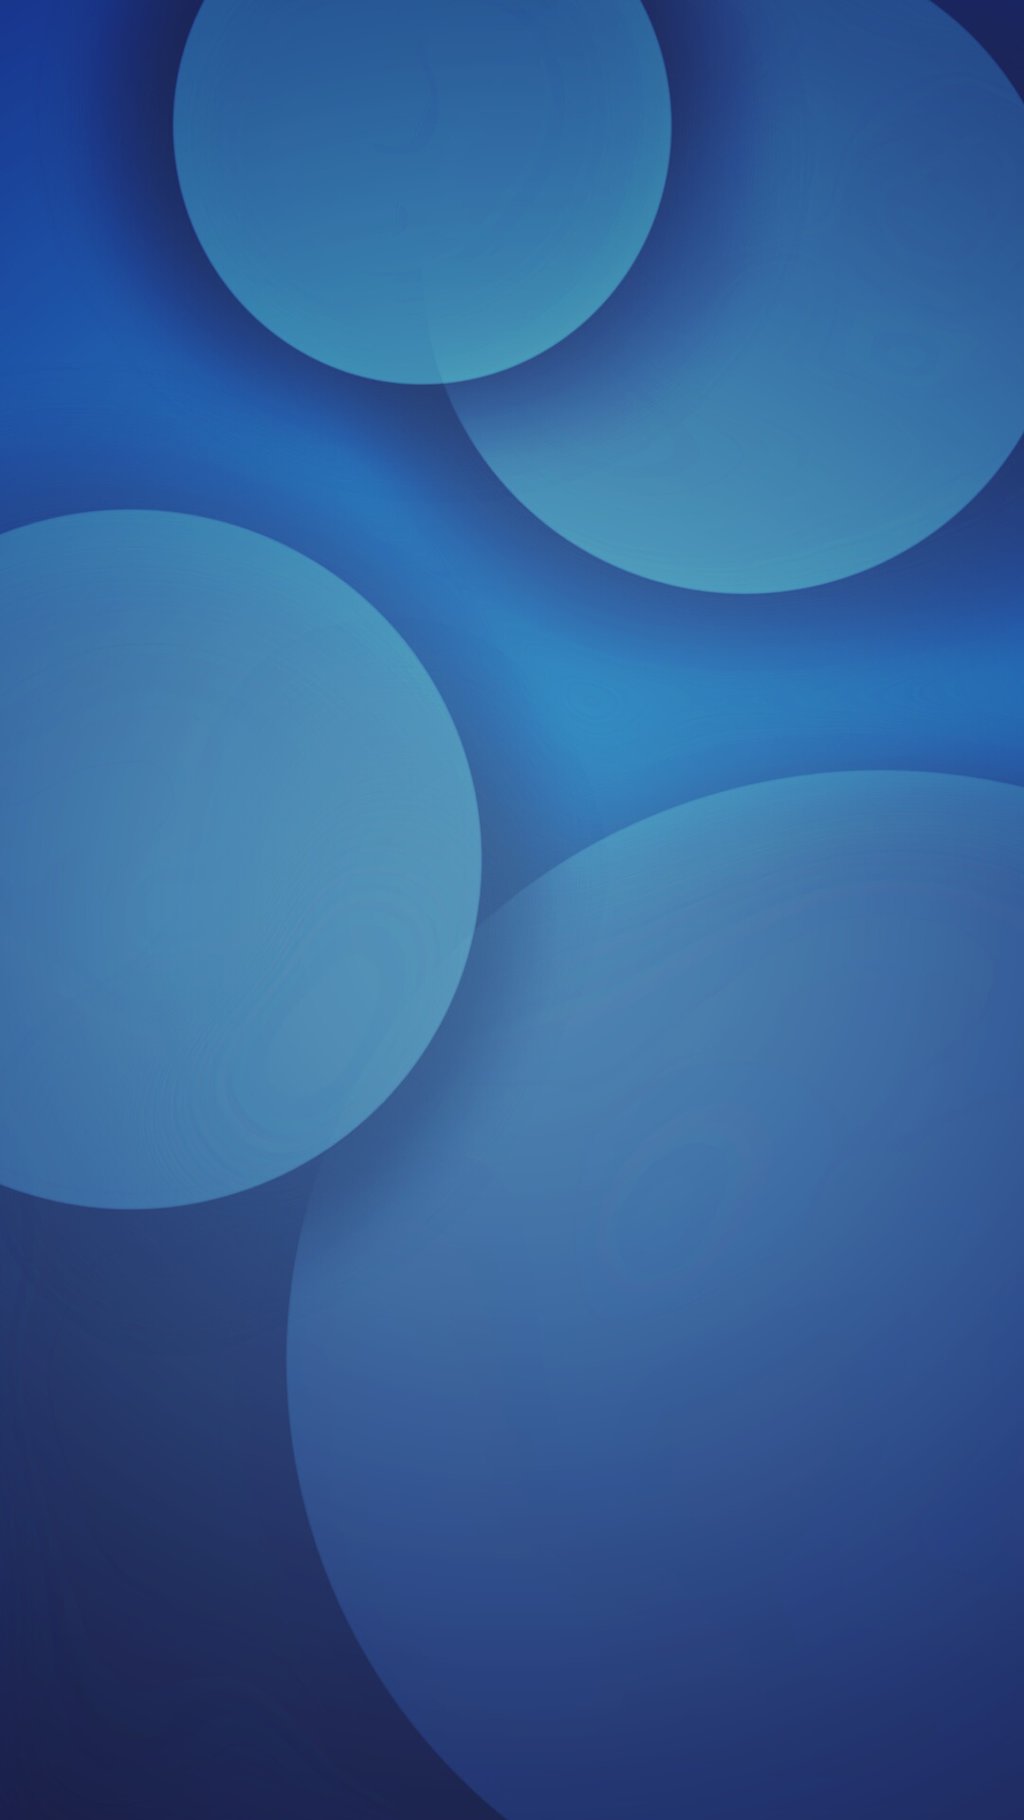 Simple blue Circle Wallpaper by BOT BlackOnTrack on